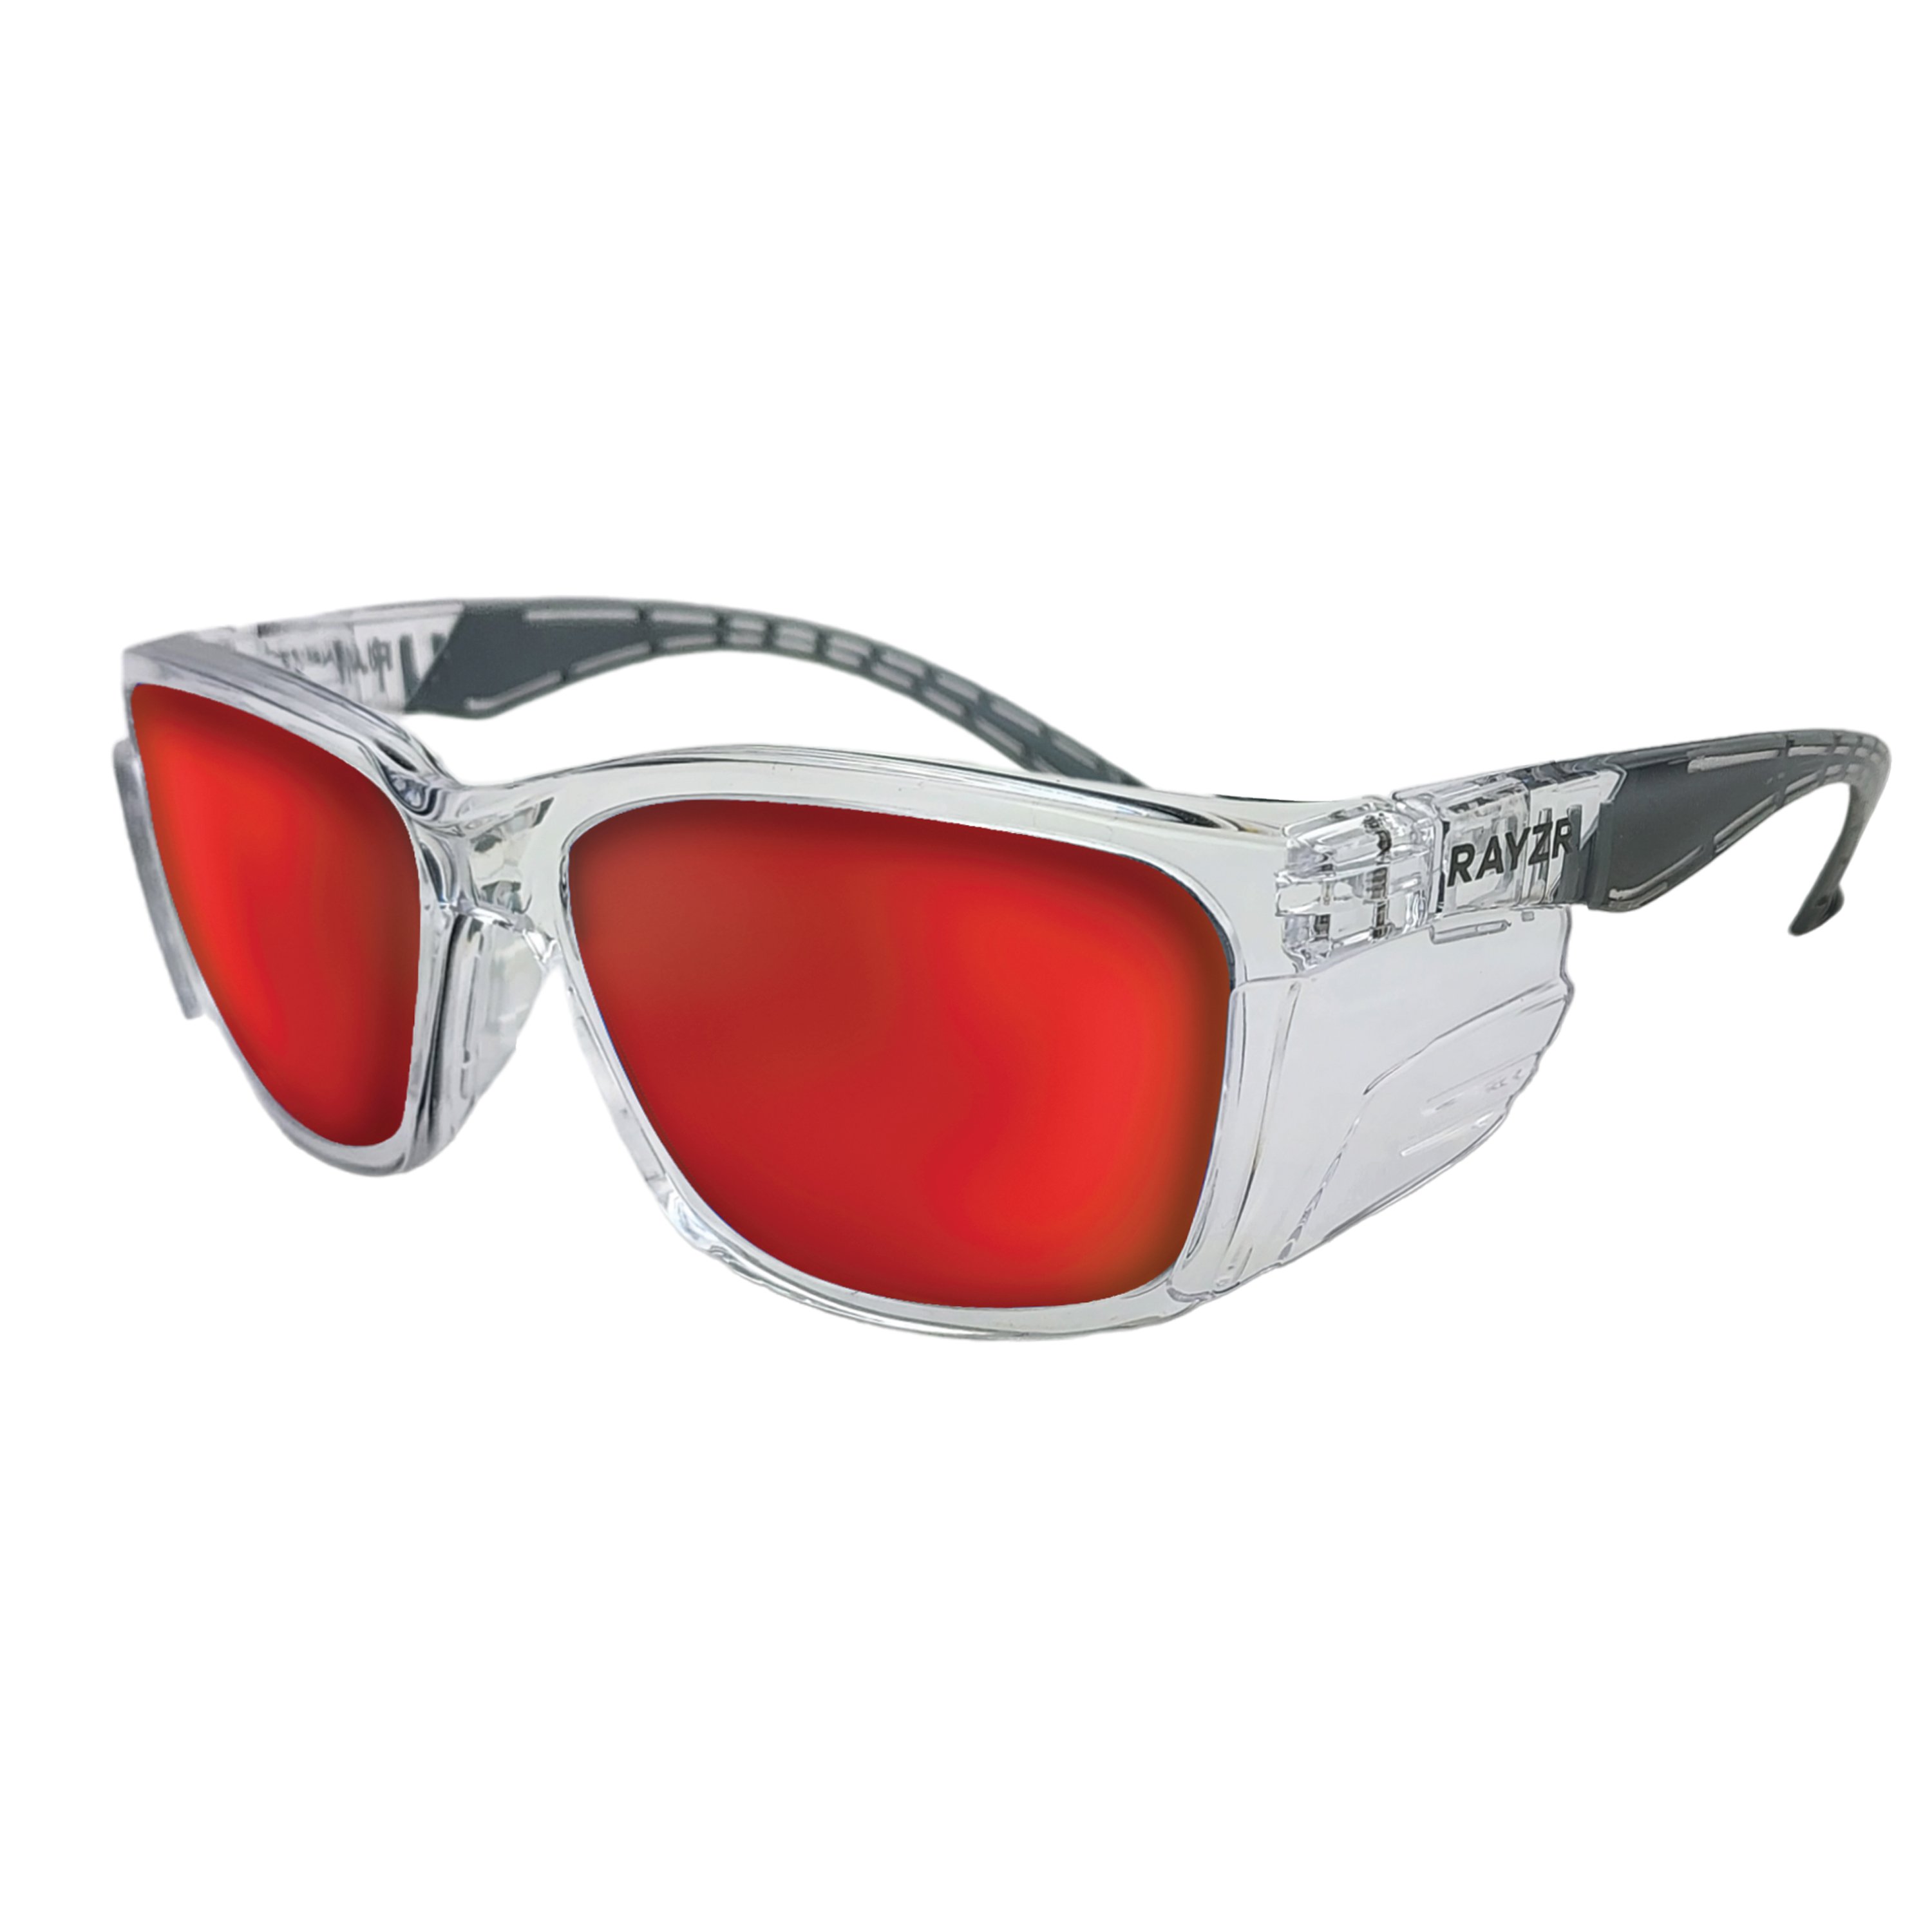 RAYZR SAFETY GLASSES - RED MIRROR - CLEAR FRAME - POLARISED